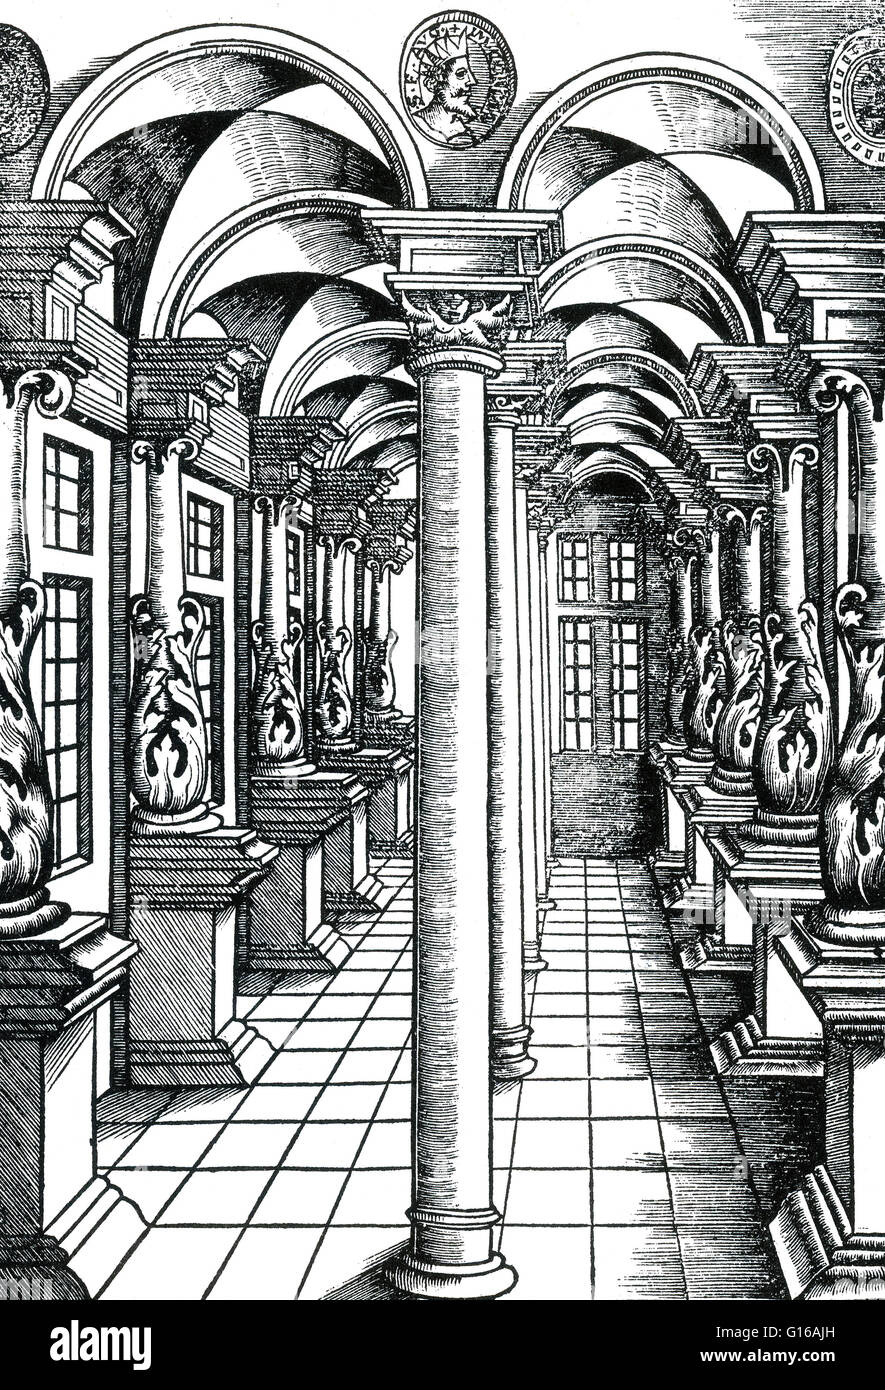 Illustration from Perspectiva: Instruction in the Art of Measuring, with the Zirckel, straightening or Scheidt Linial. Perspective, in context of vision and visual perception, is the way in which objects appear to the eye based on their spatial attributes Stock Photo